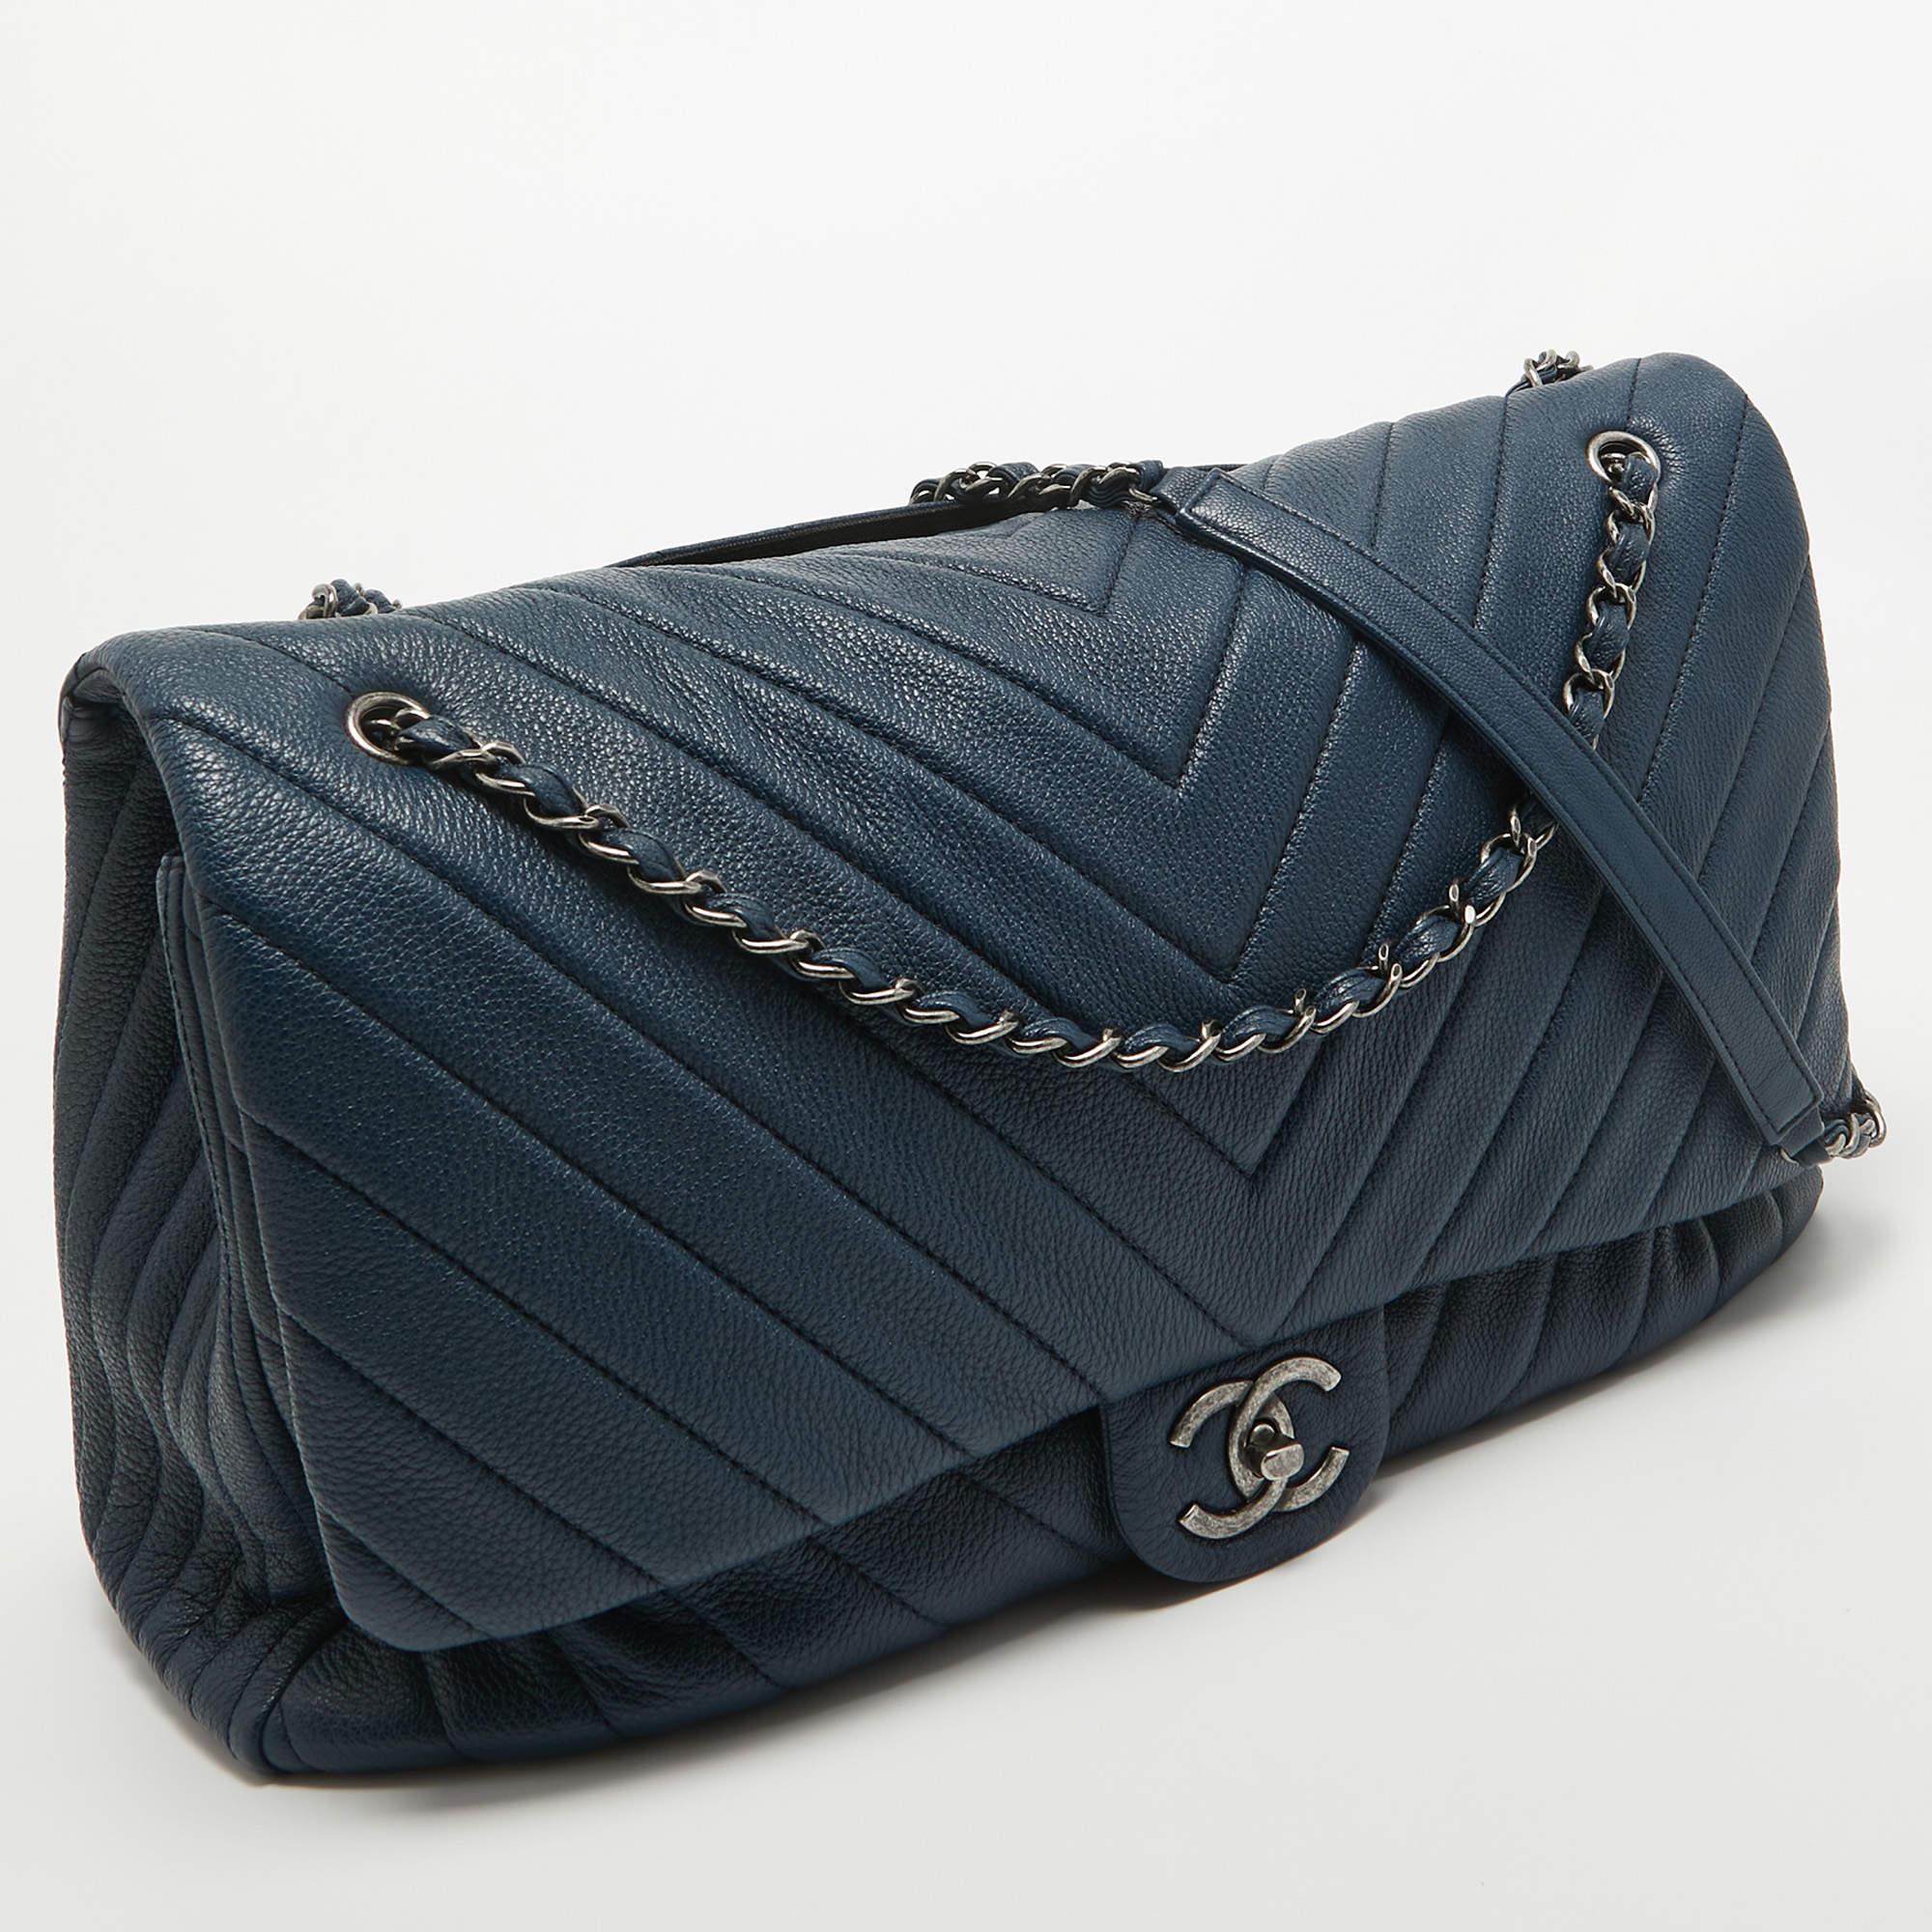 Indulge in luxury with this Chanel bag. Meticulously crafted from premium materials, it combines exquisite design, impeccable craftsmanship, and timeless elegance. Elevate your style with this fashion accessory.

